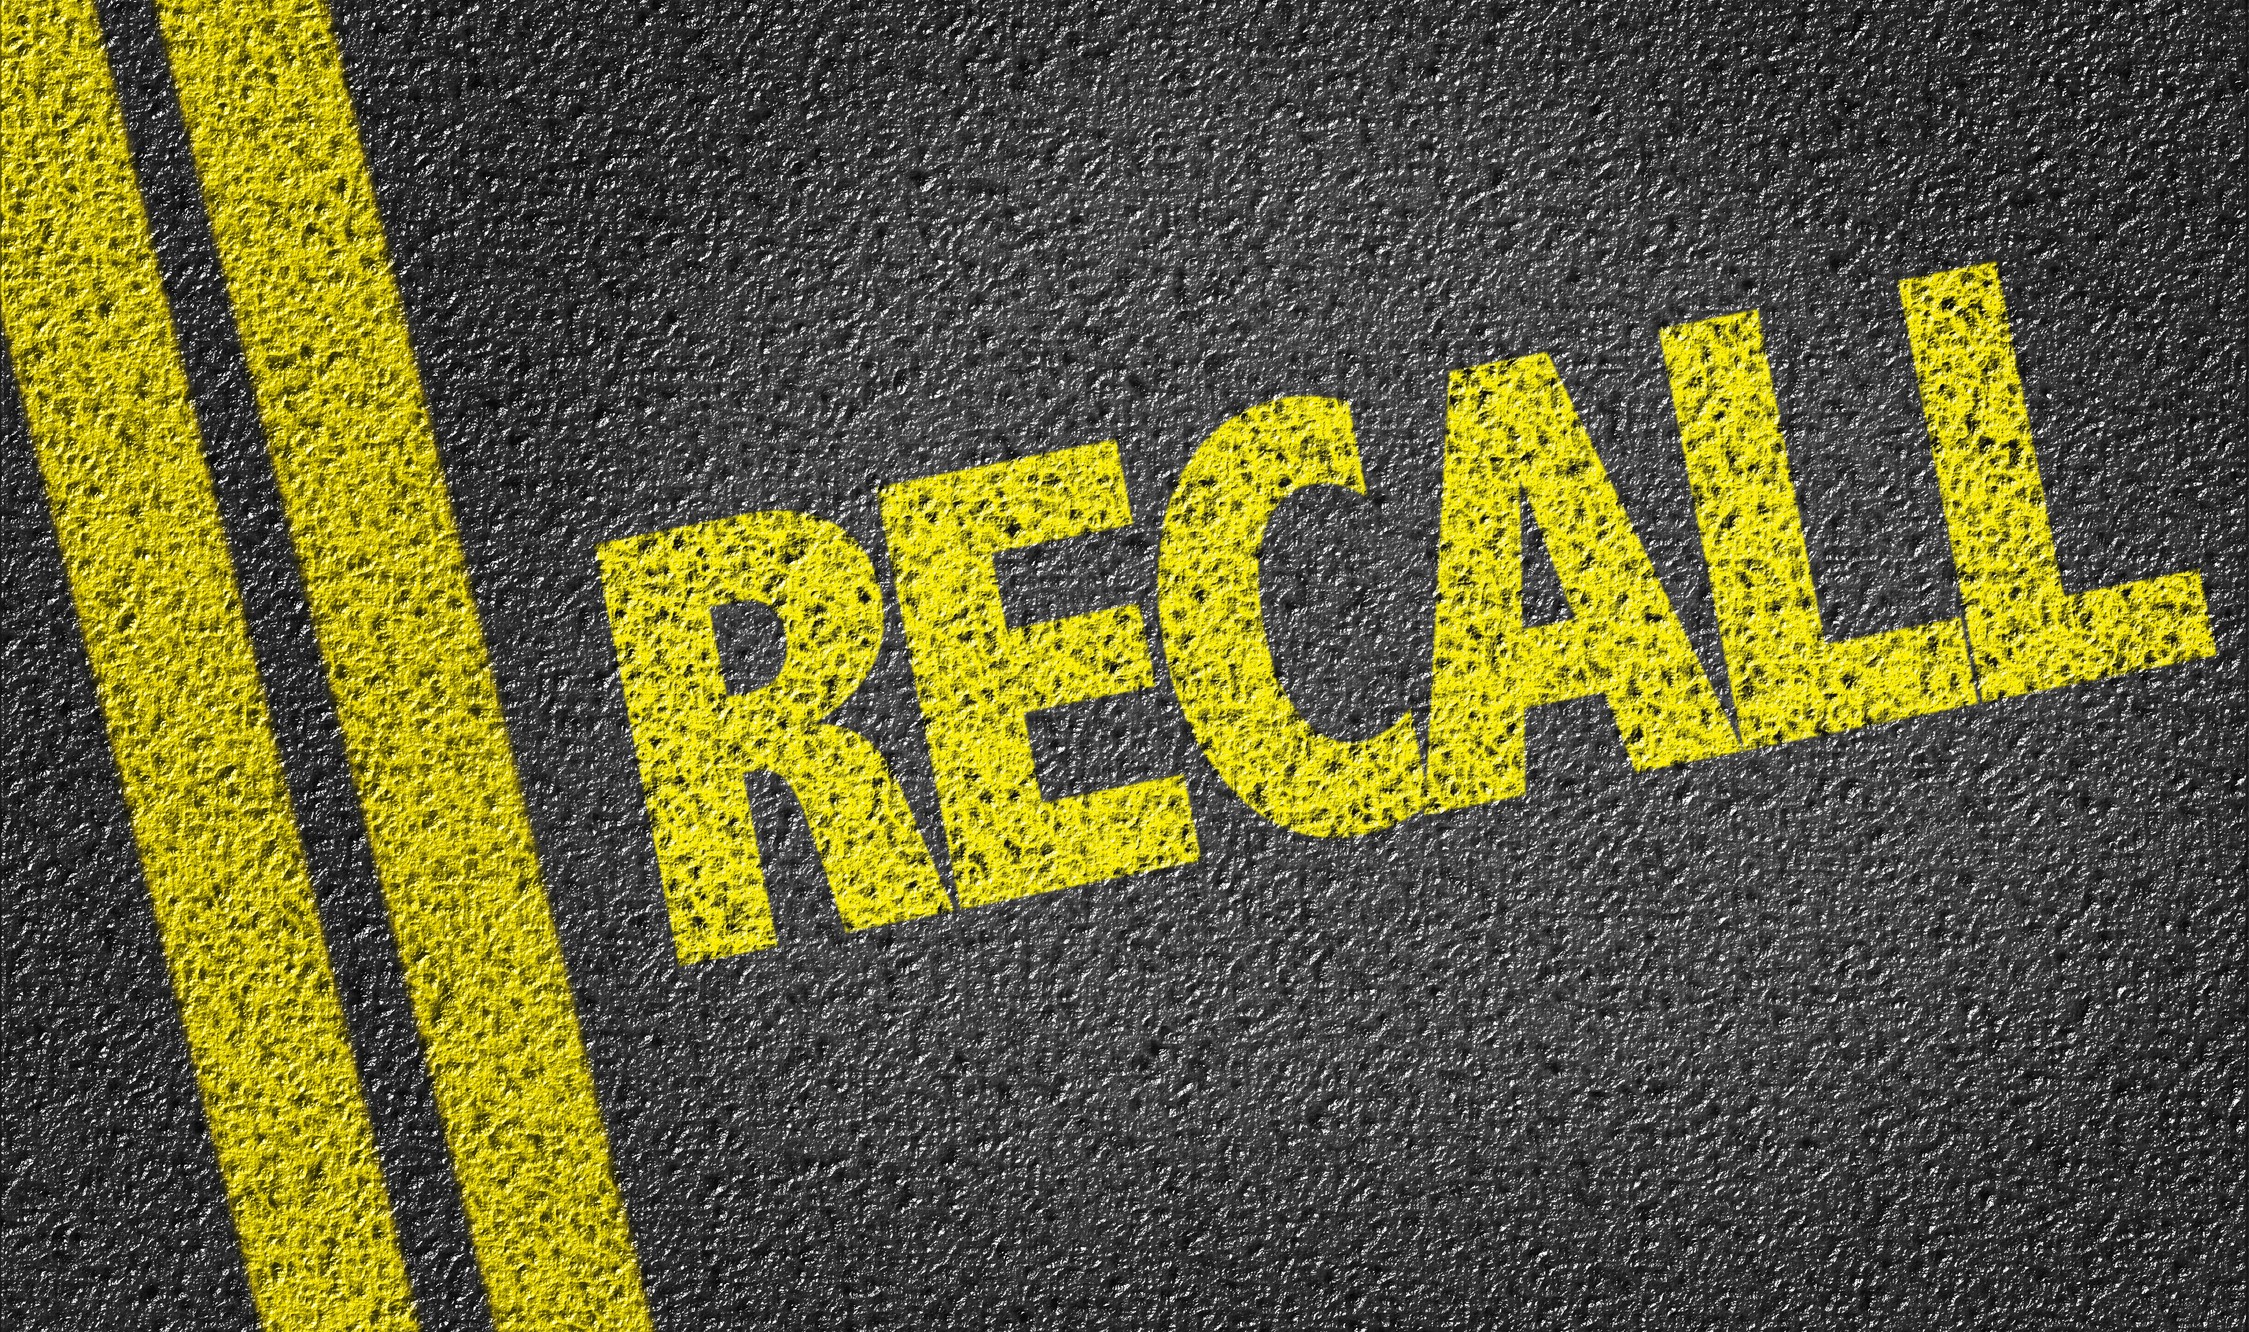 DOES MY CAR HAVE A RECALL?